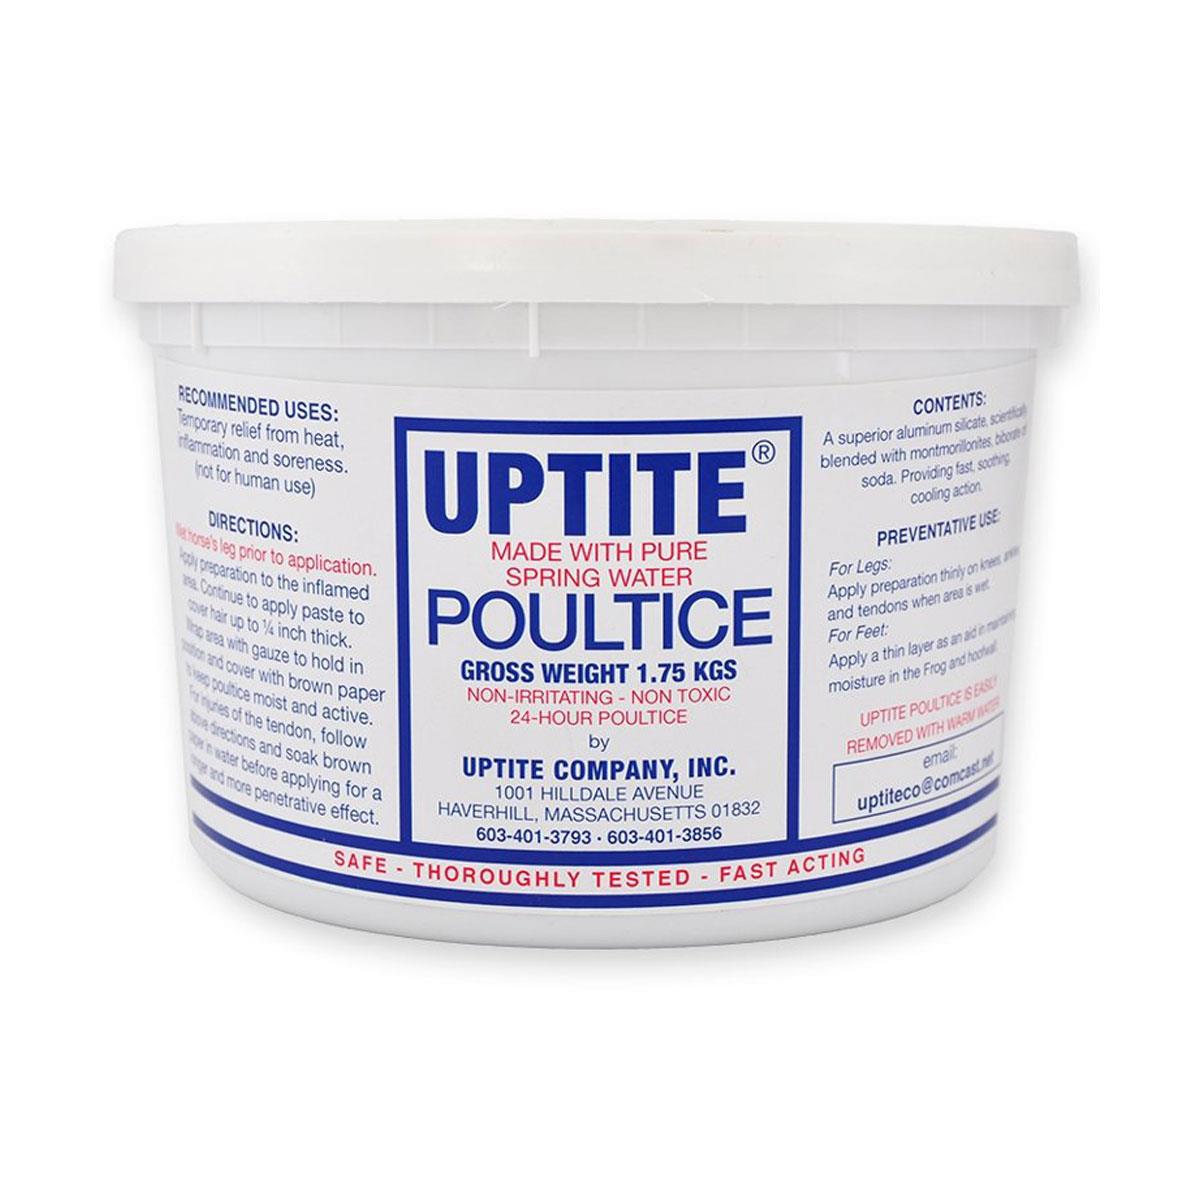 Uptite Poultice - Just Horse Riders